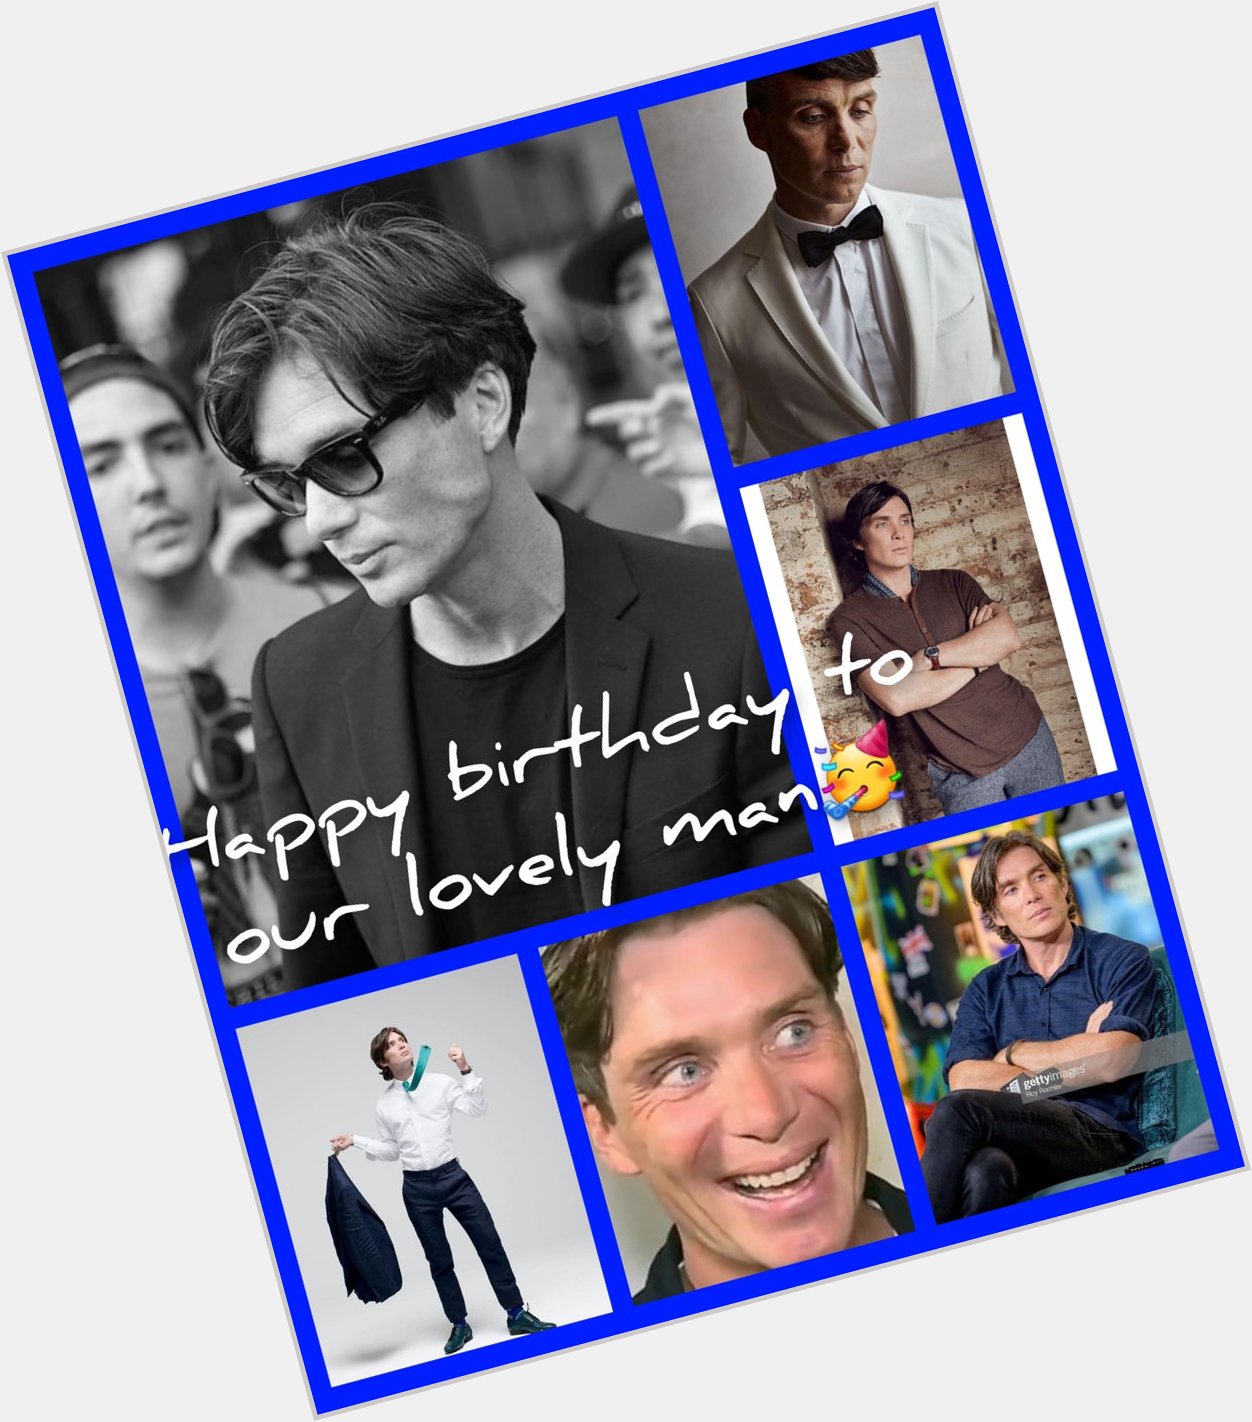 What a joyfull day to start with a happy birthday for our irish delight cillian murphy  